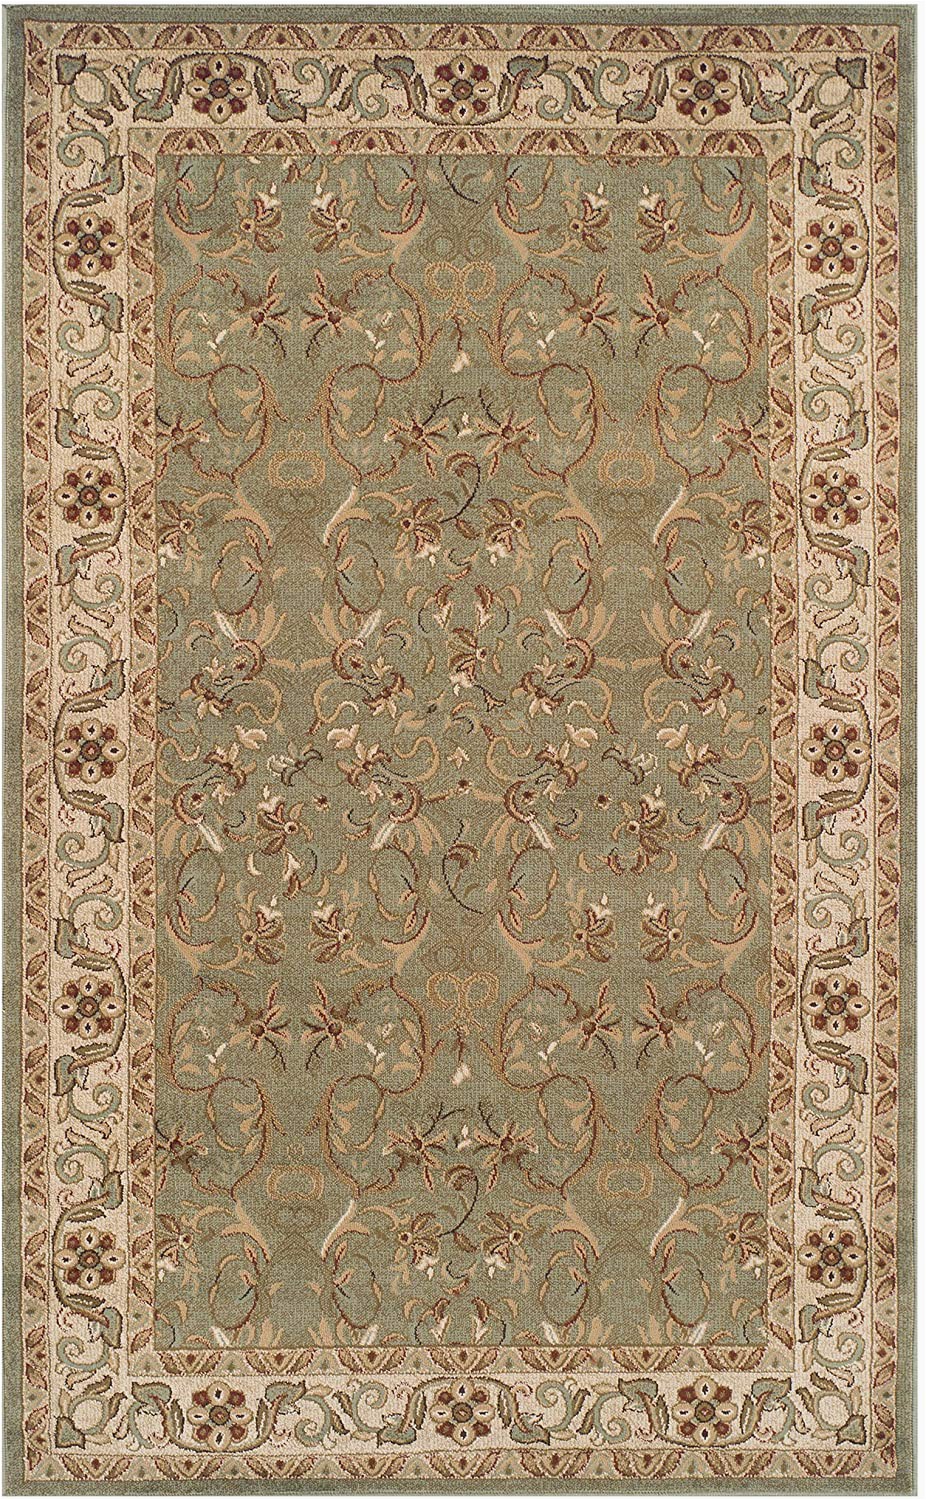 Lowe S Home Improvement area Rugs Superior Heritage 8 X 10 Green area Rug Contemporary Living Room & Bedroom area Rug Anti Static and Water Repellent for Residential or Mercial